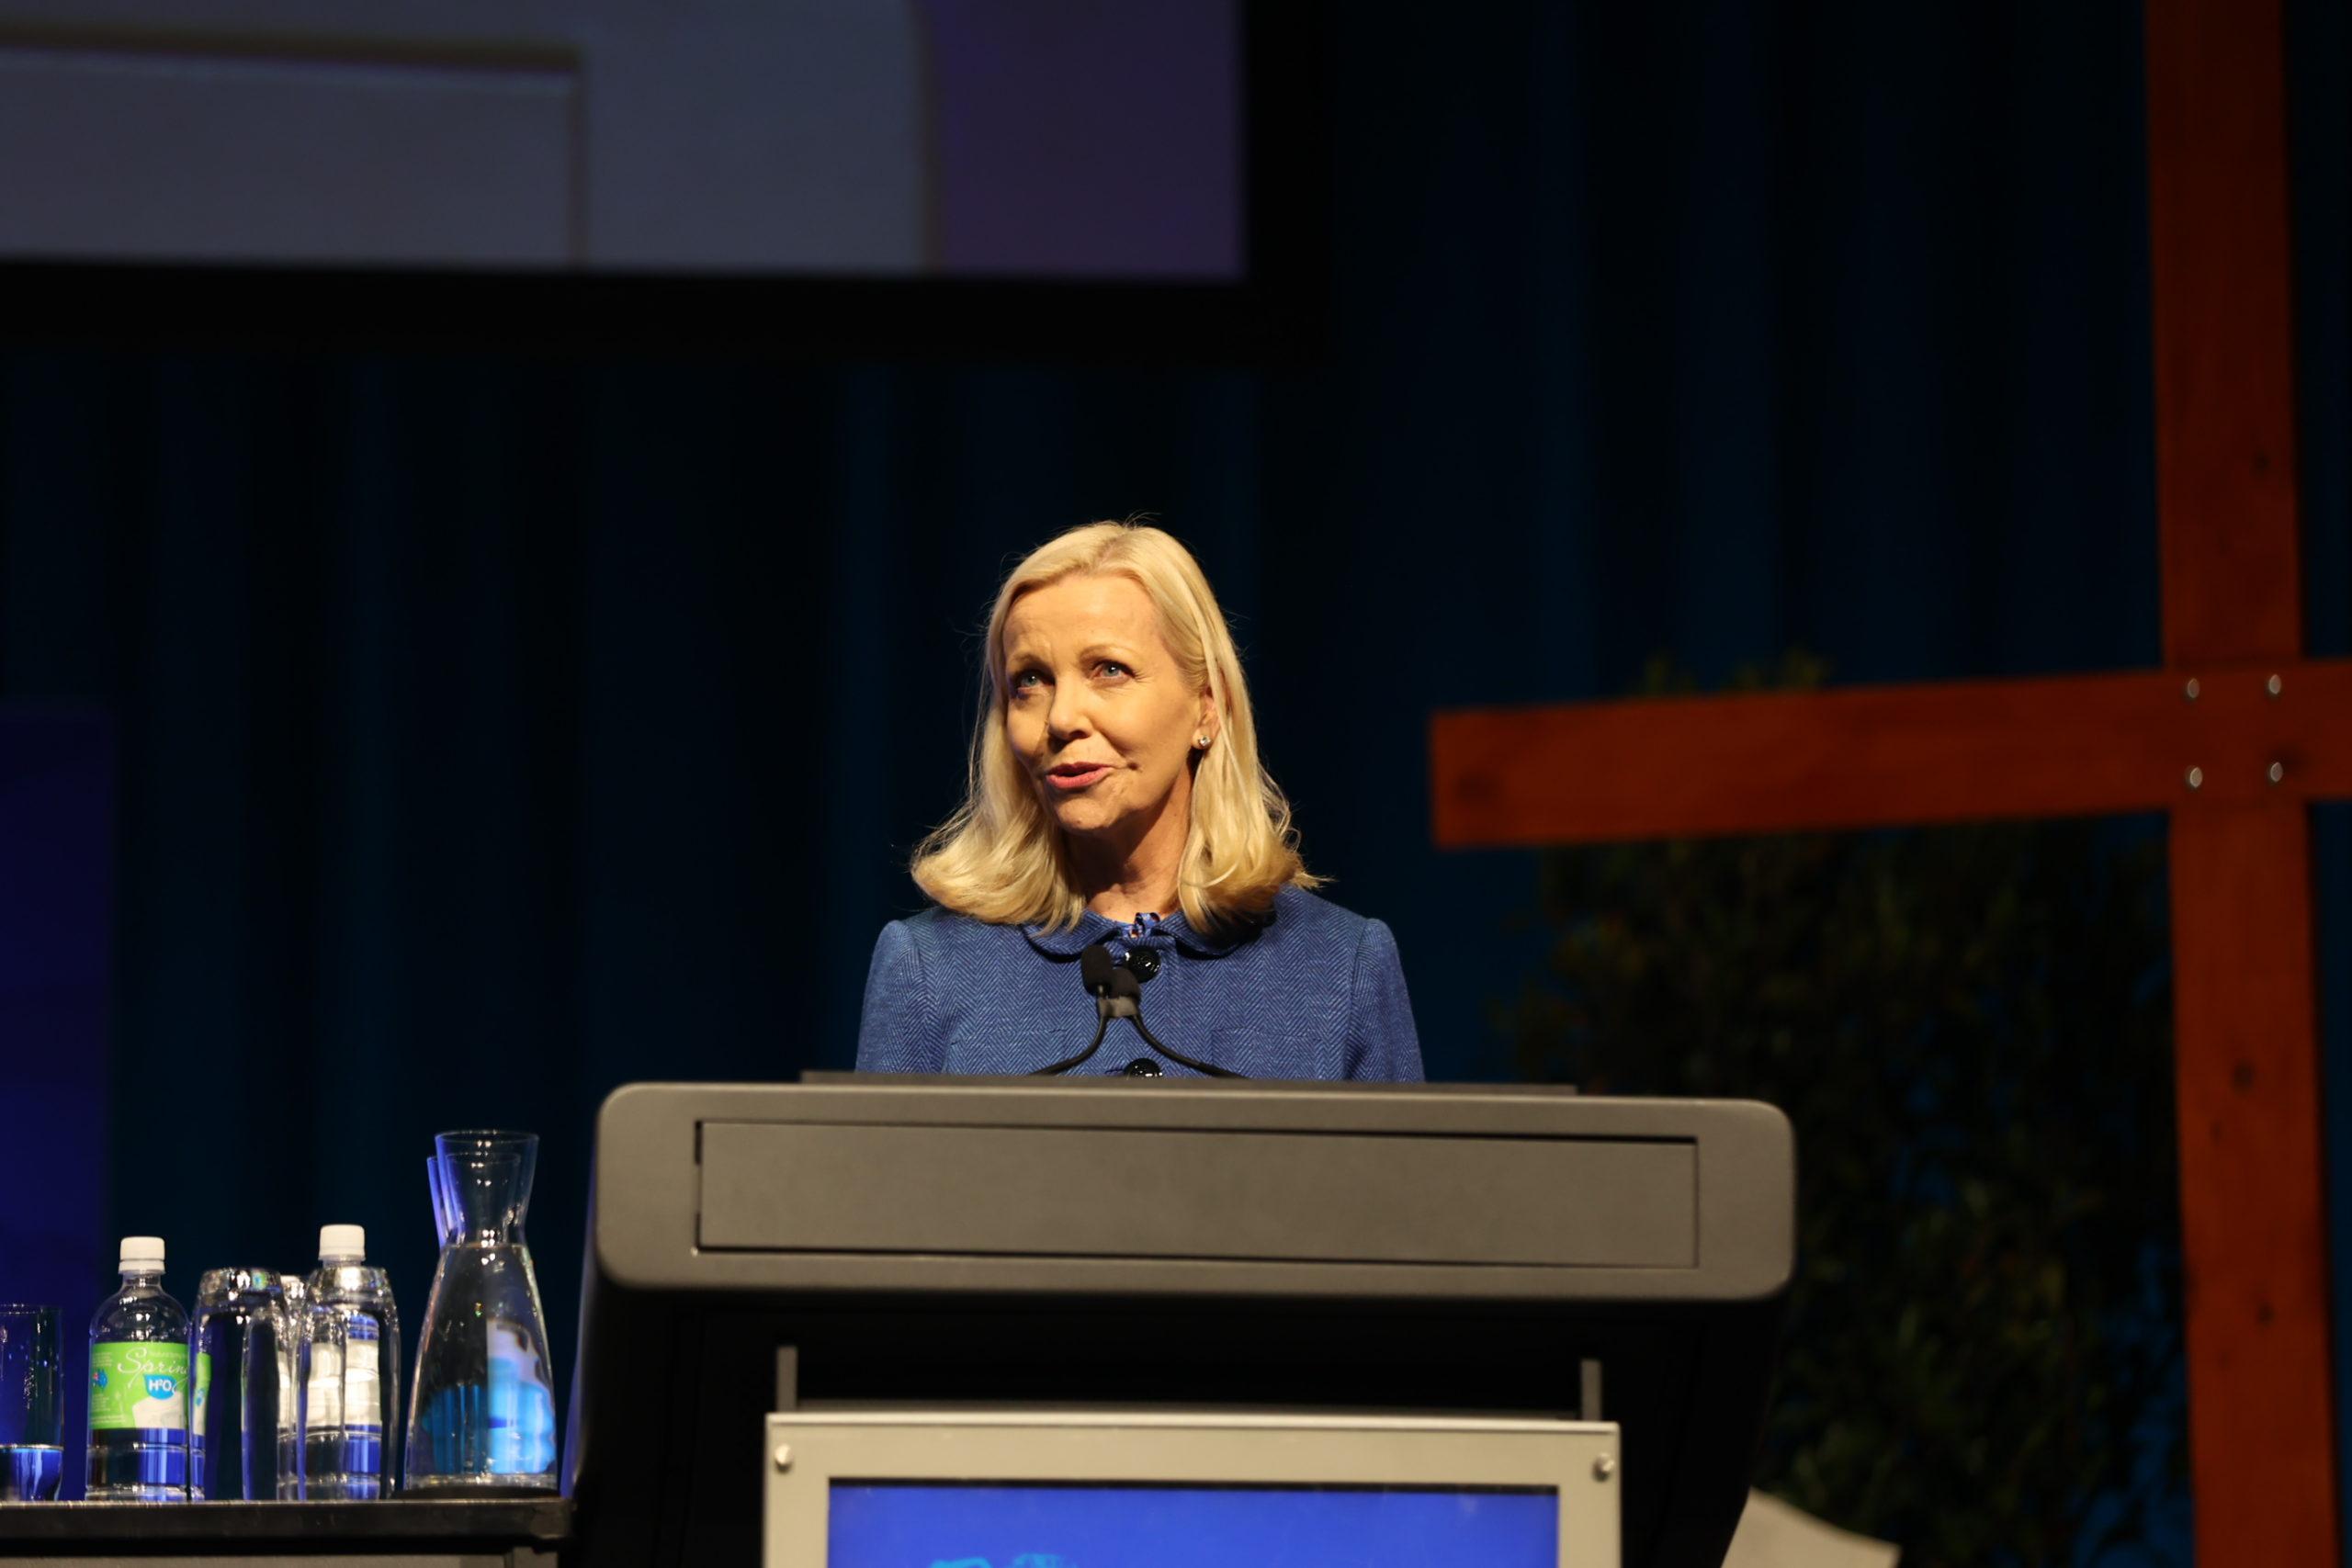 NCEC2022 Conference: Are We Listening to the Changing Nature of Students’ Mental Health and Wellbeing?